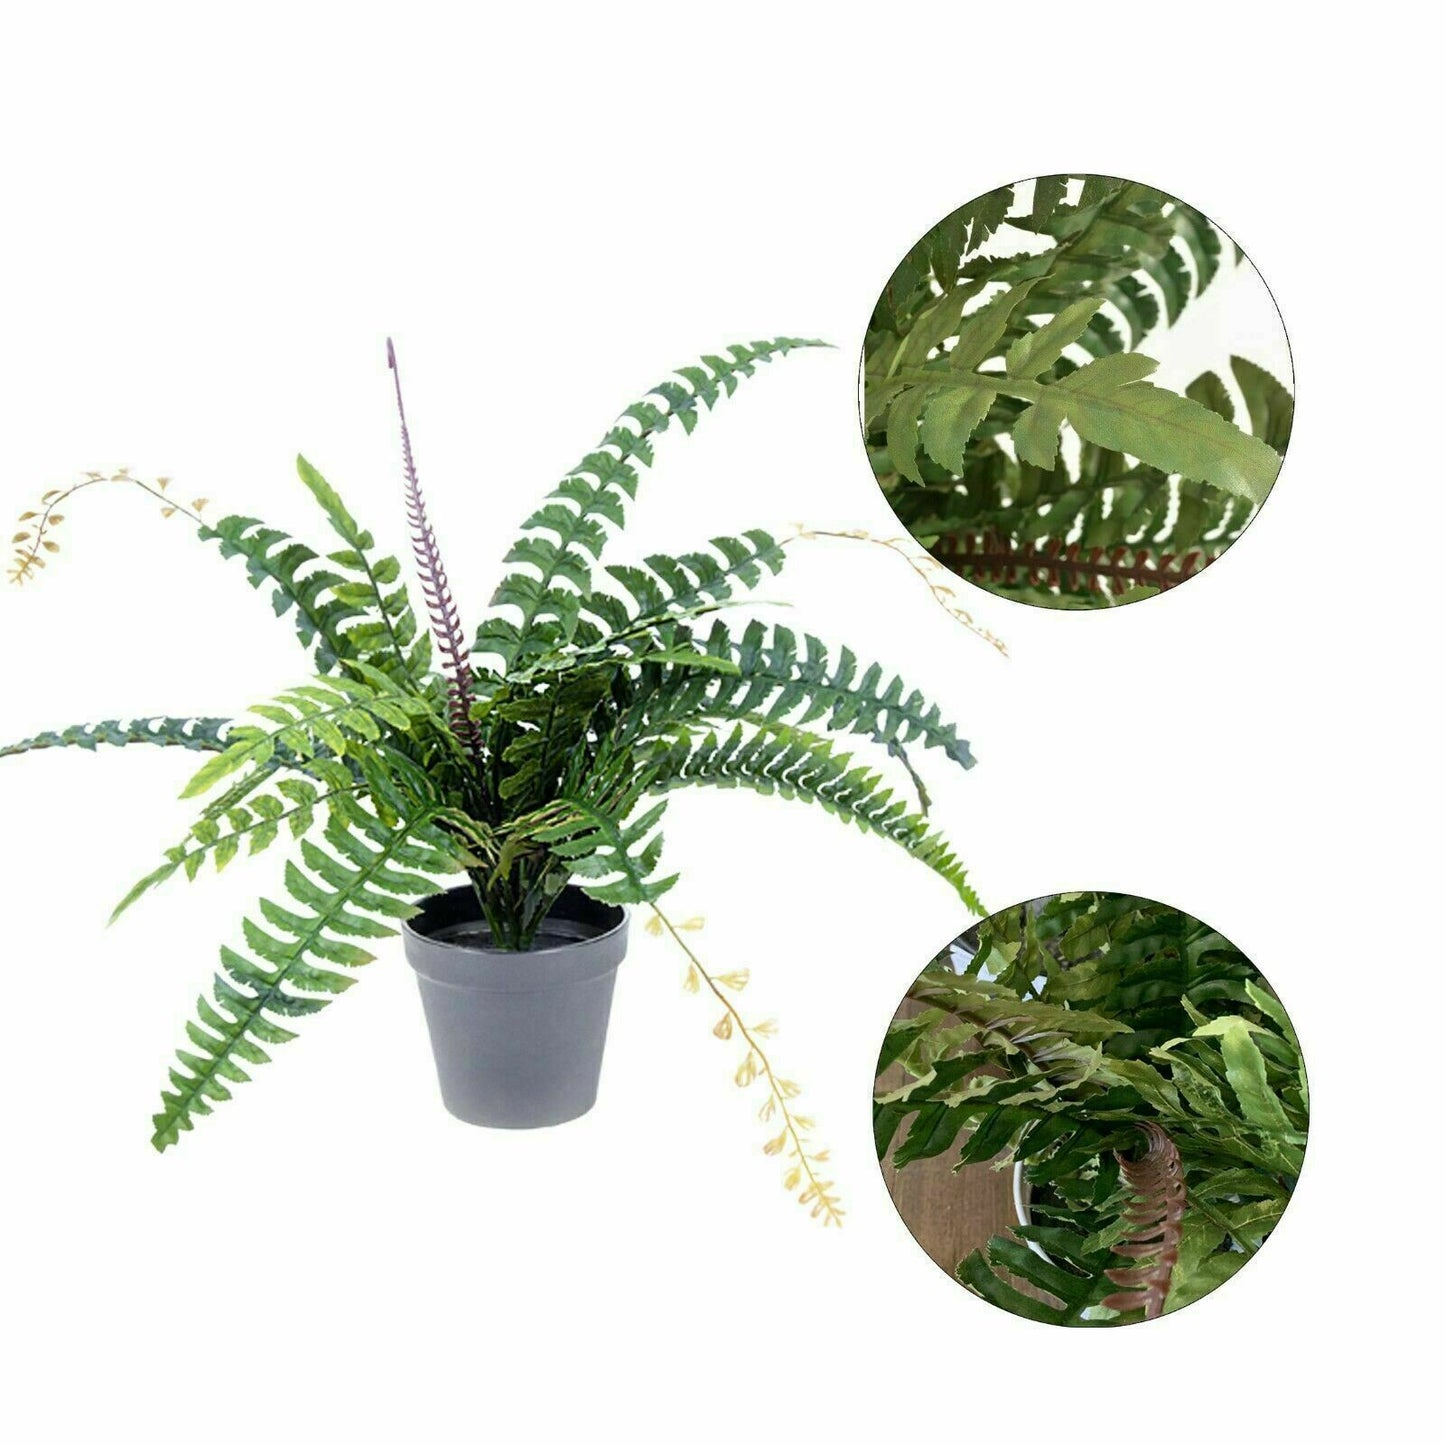 Artificial Fern Plant Potted 50cm Fake Foliage Floral Indoor Home/ Office Decor